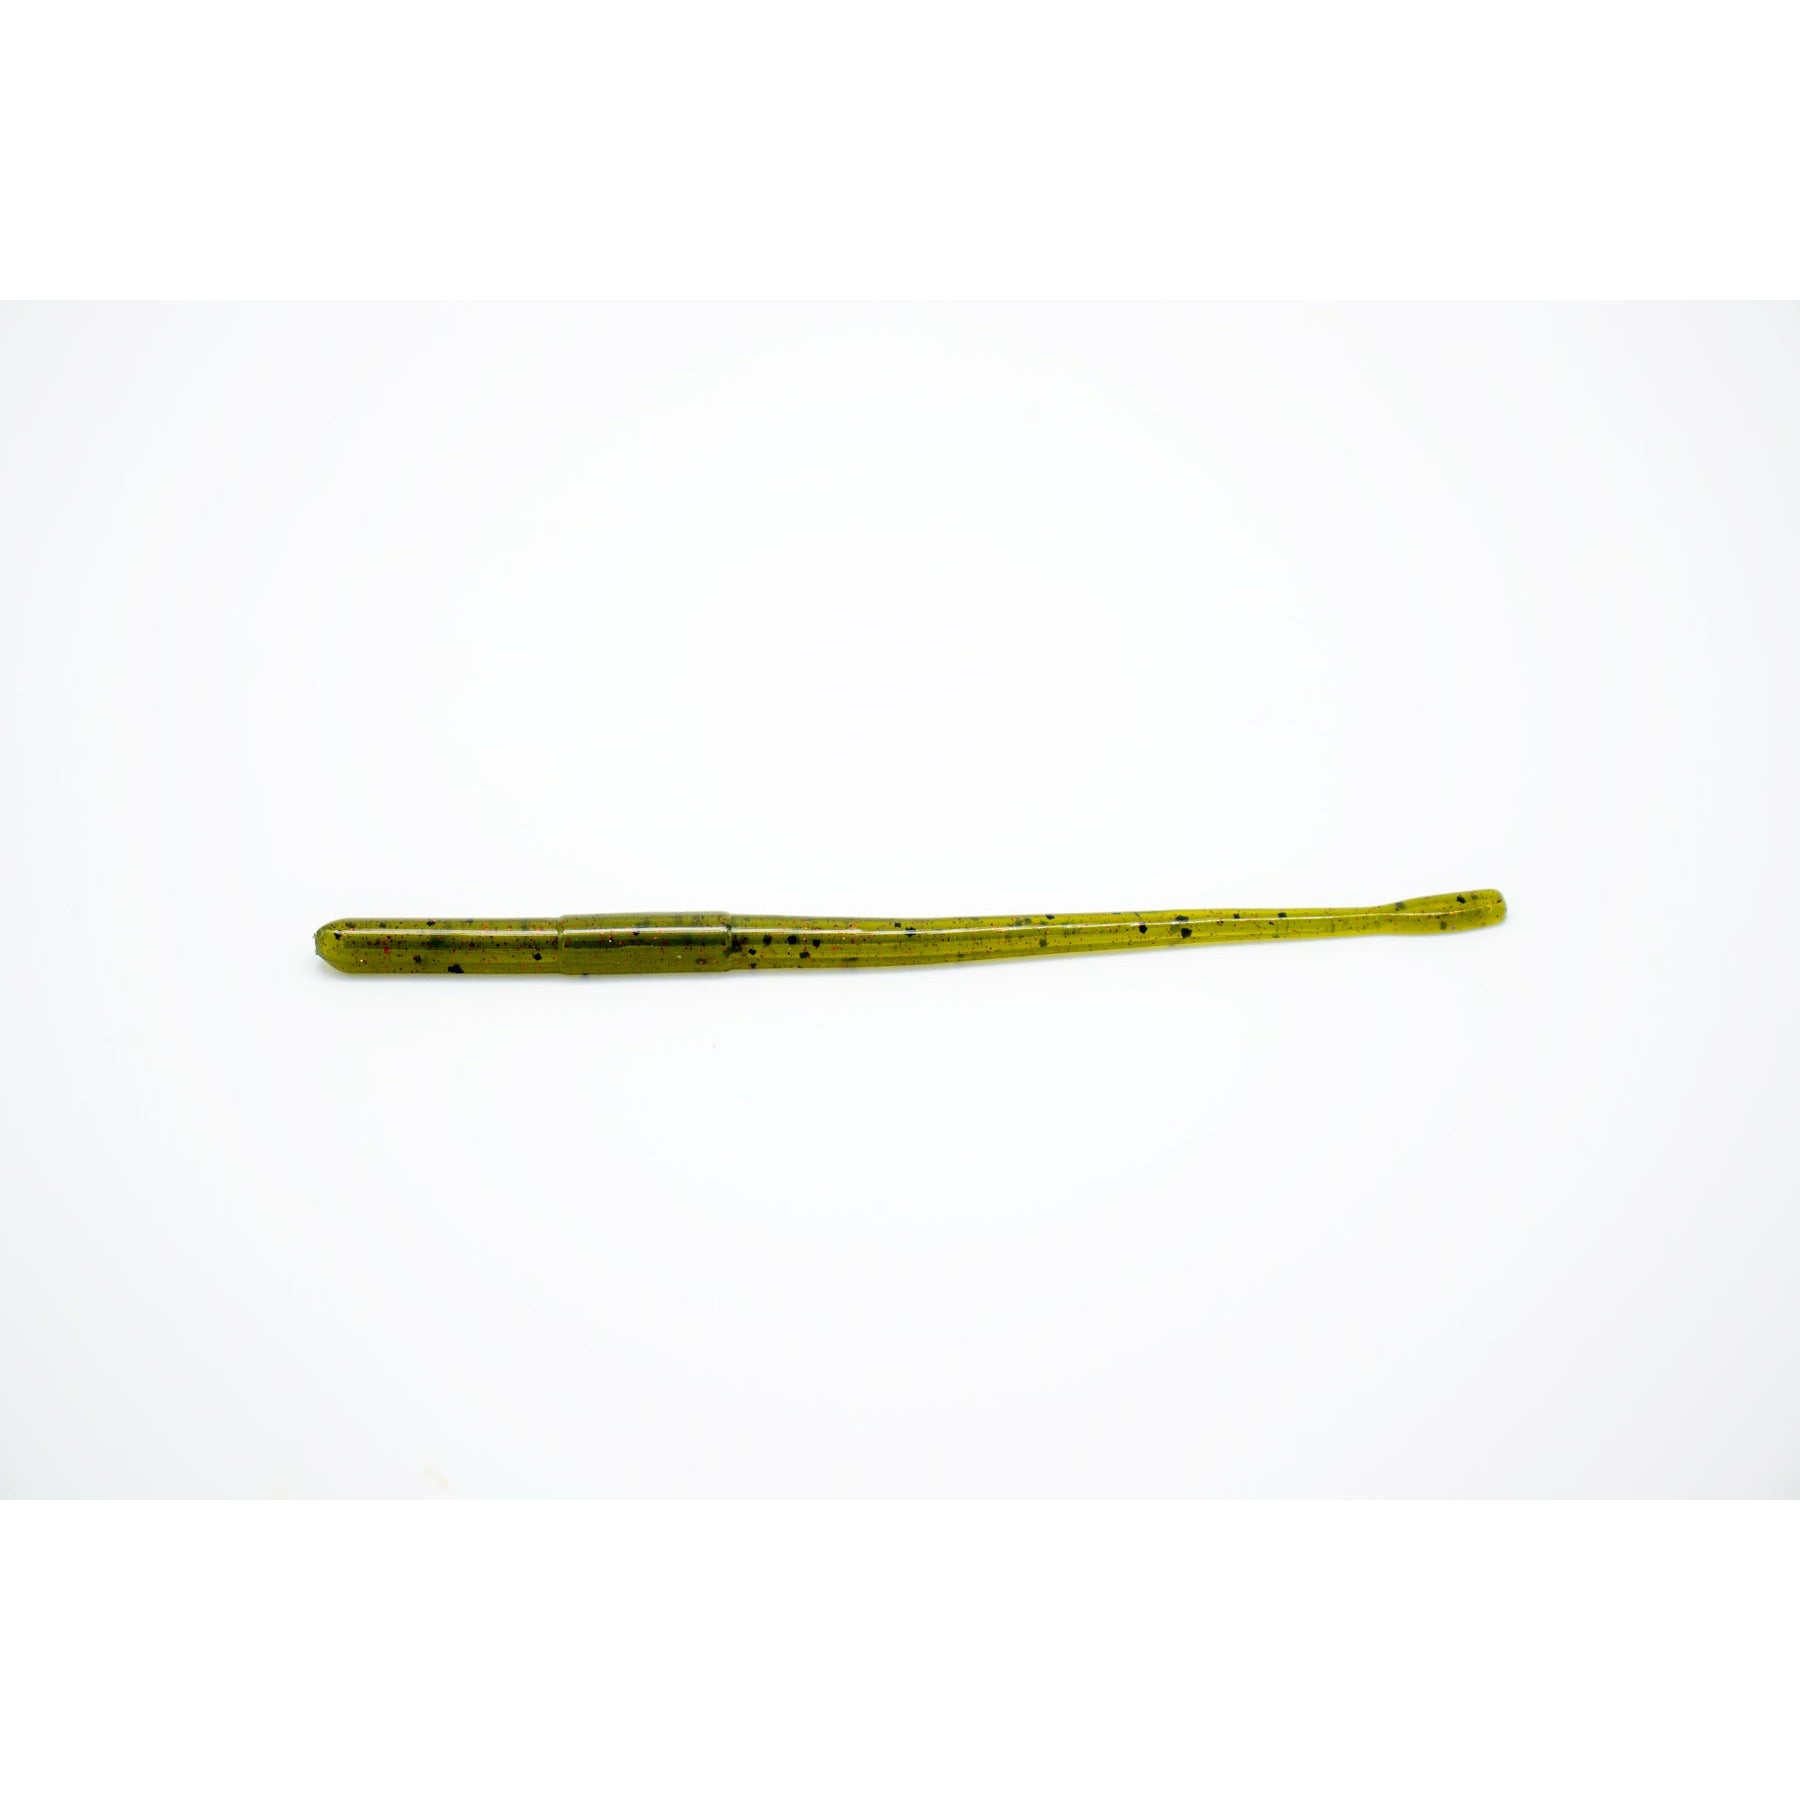 5150 STRAIGHT TAIL WORM 6" - Copperstate Tackle